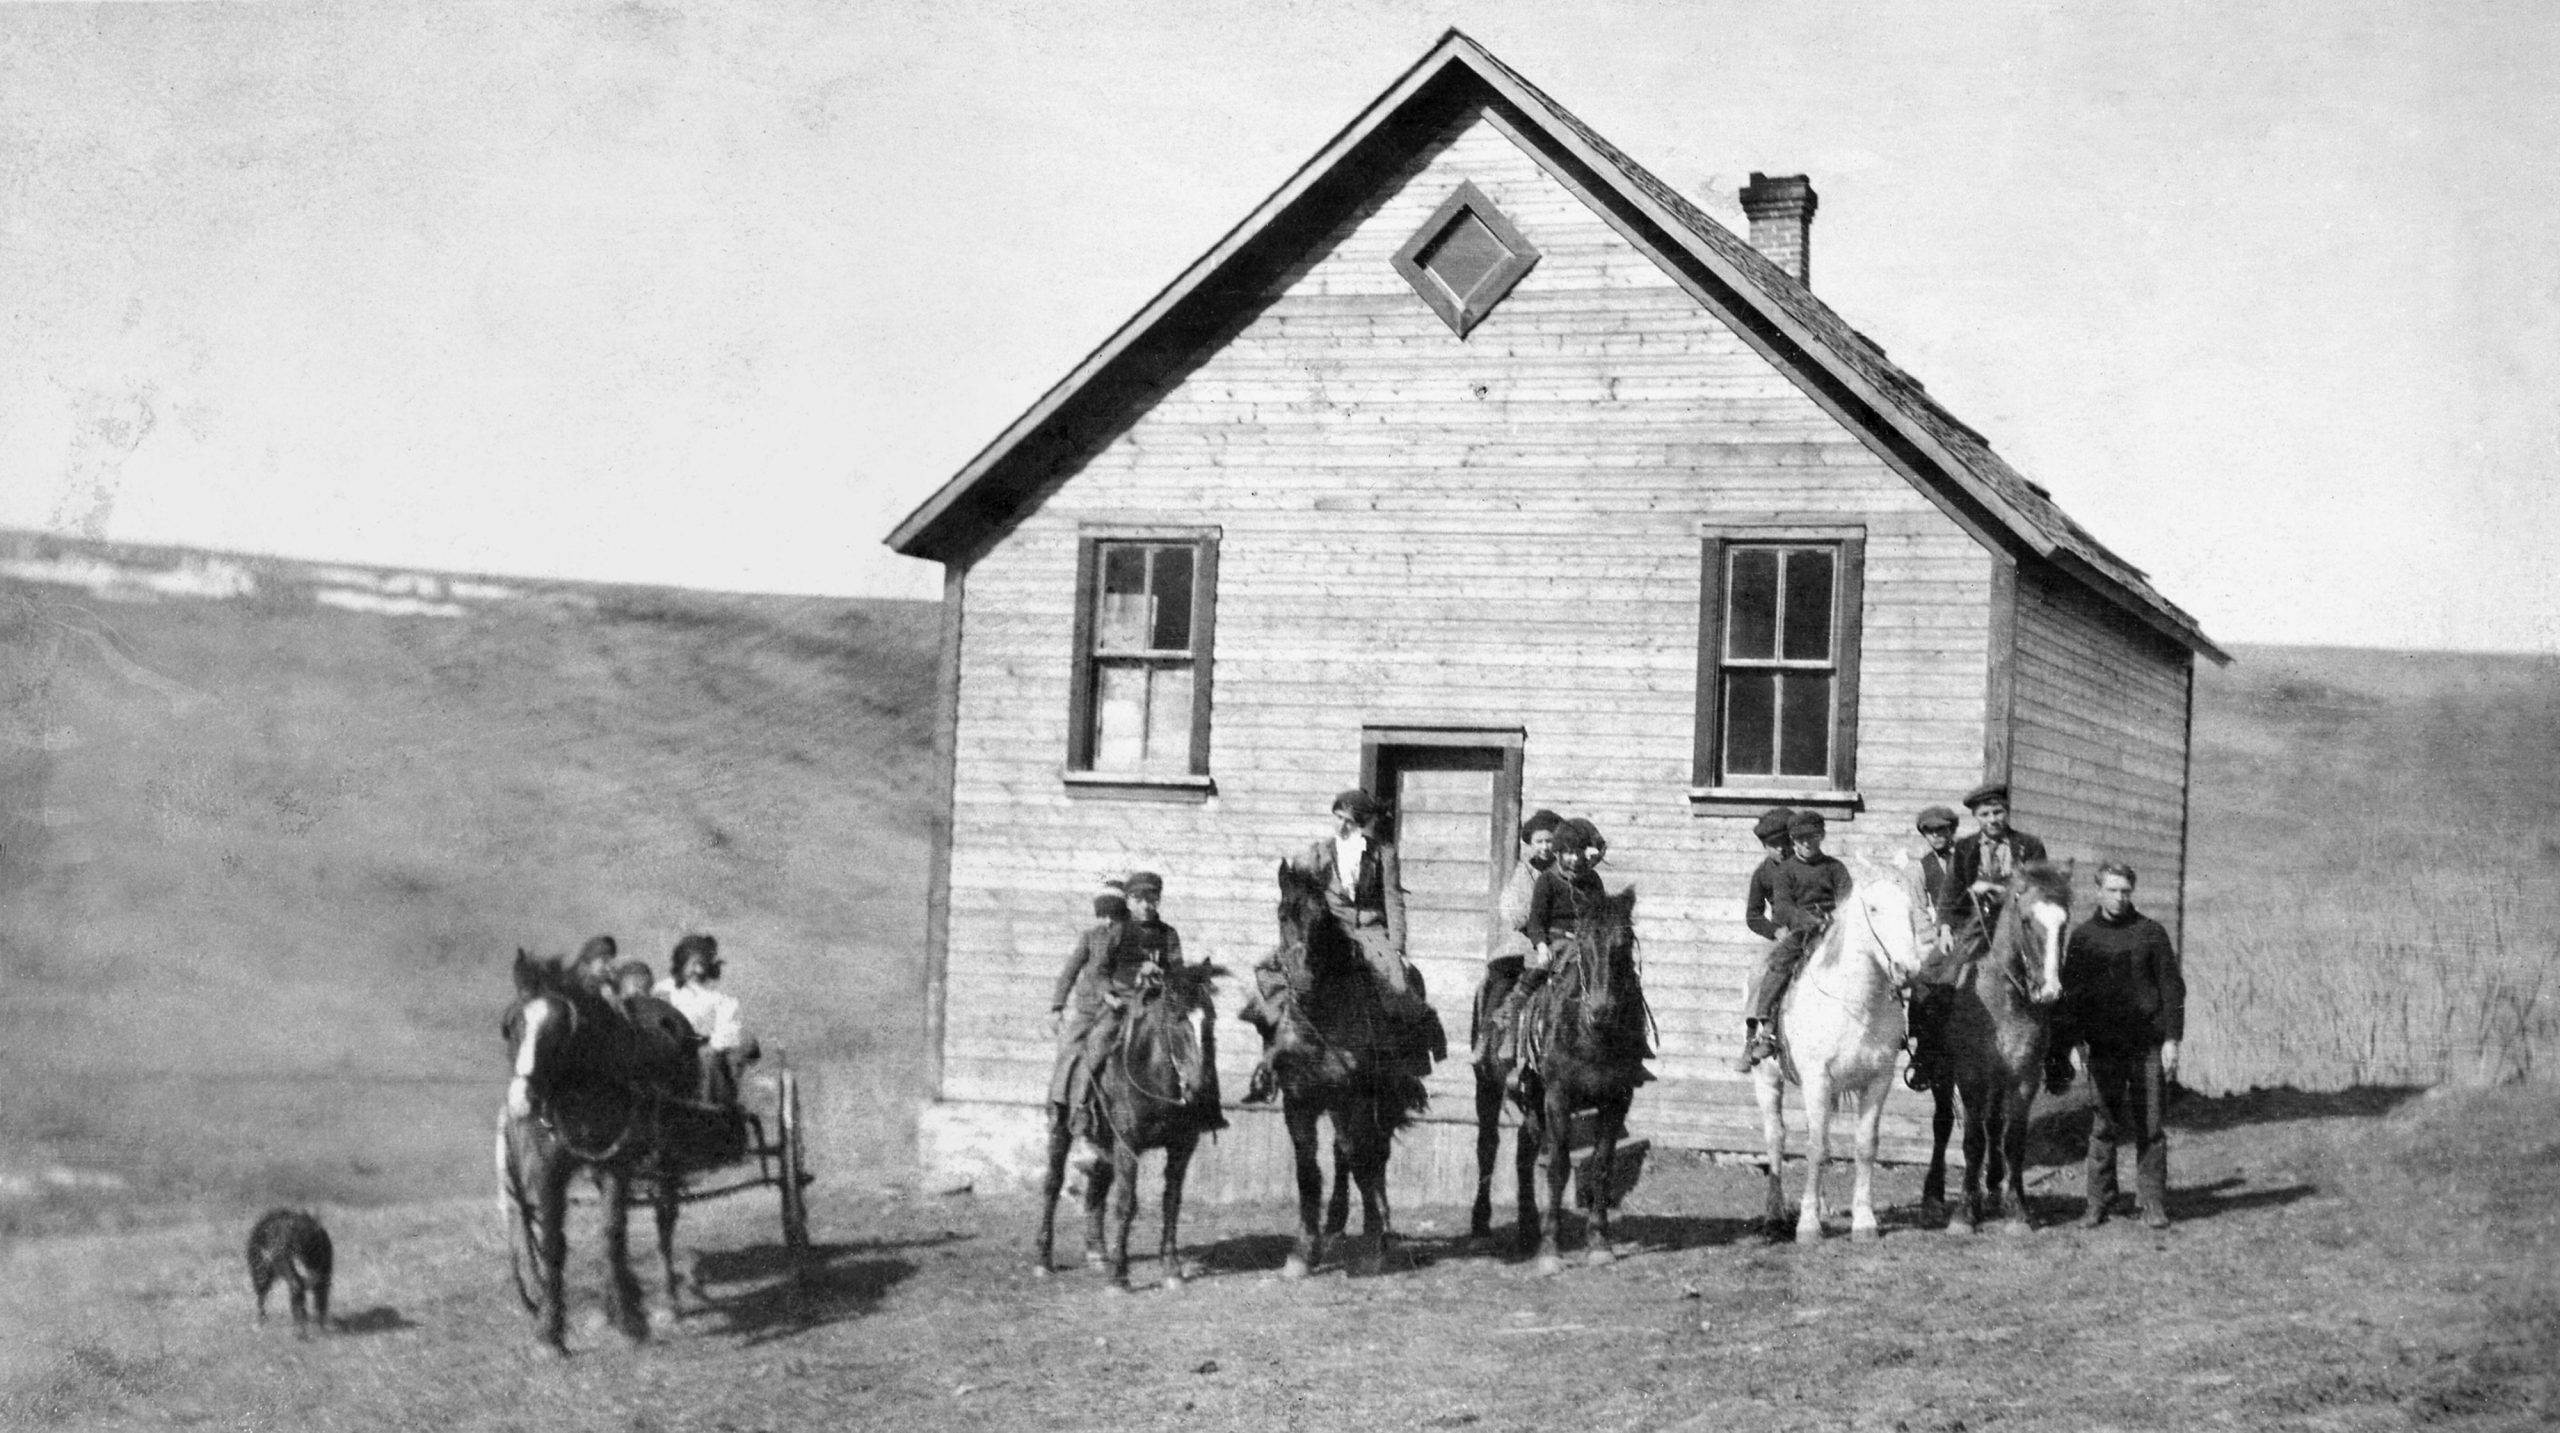 Five horses lined up in front of school. Two children atop each. One horse and buggy with three children riding and a dog.